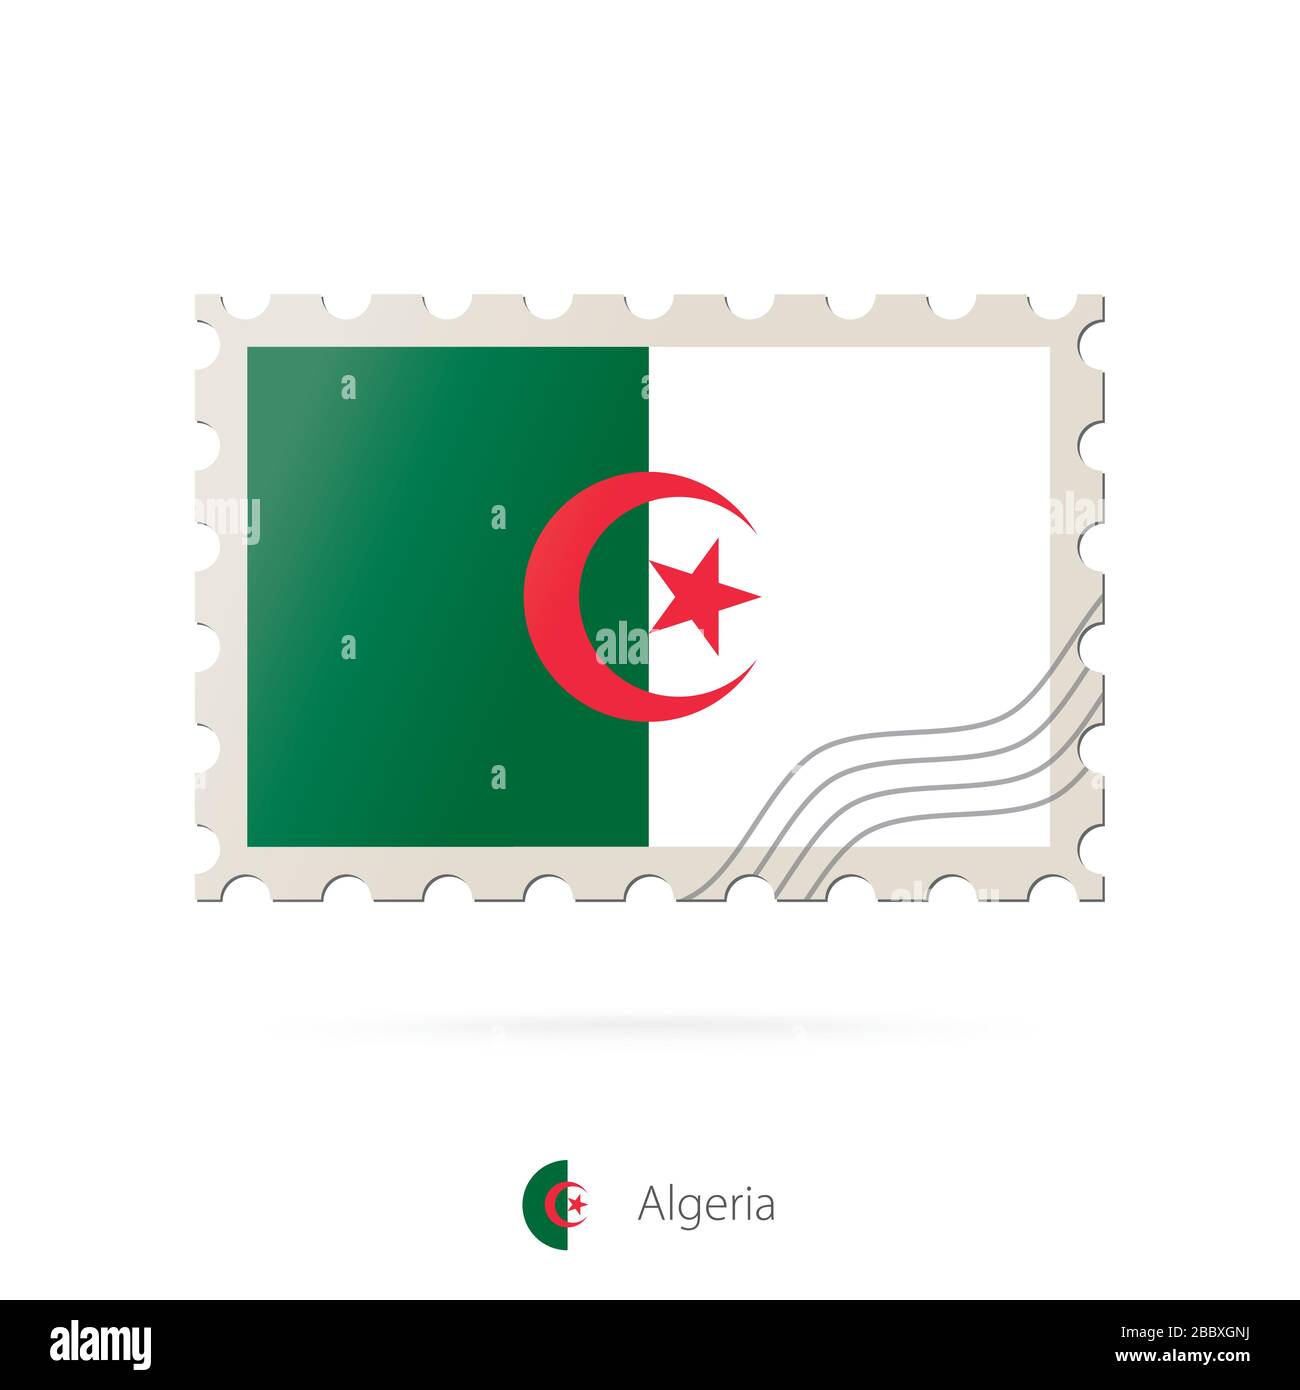 Postage stamp with the image of Algeria flag. Algeria Flag Postage on white background with shadow. Vector Illustration. Stock Vector